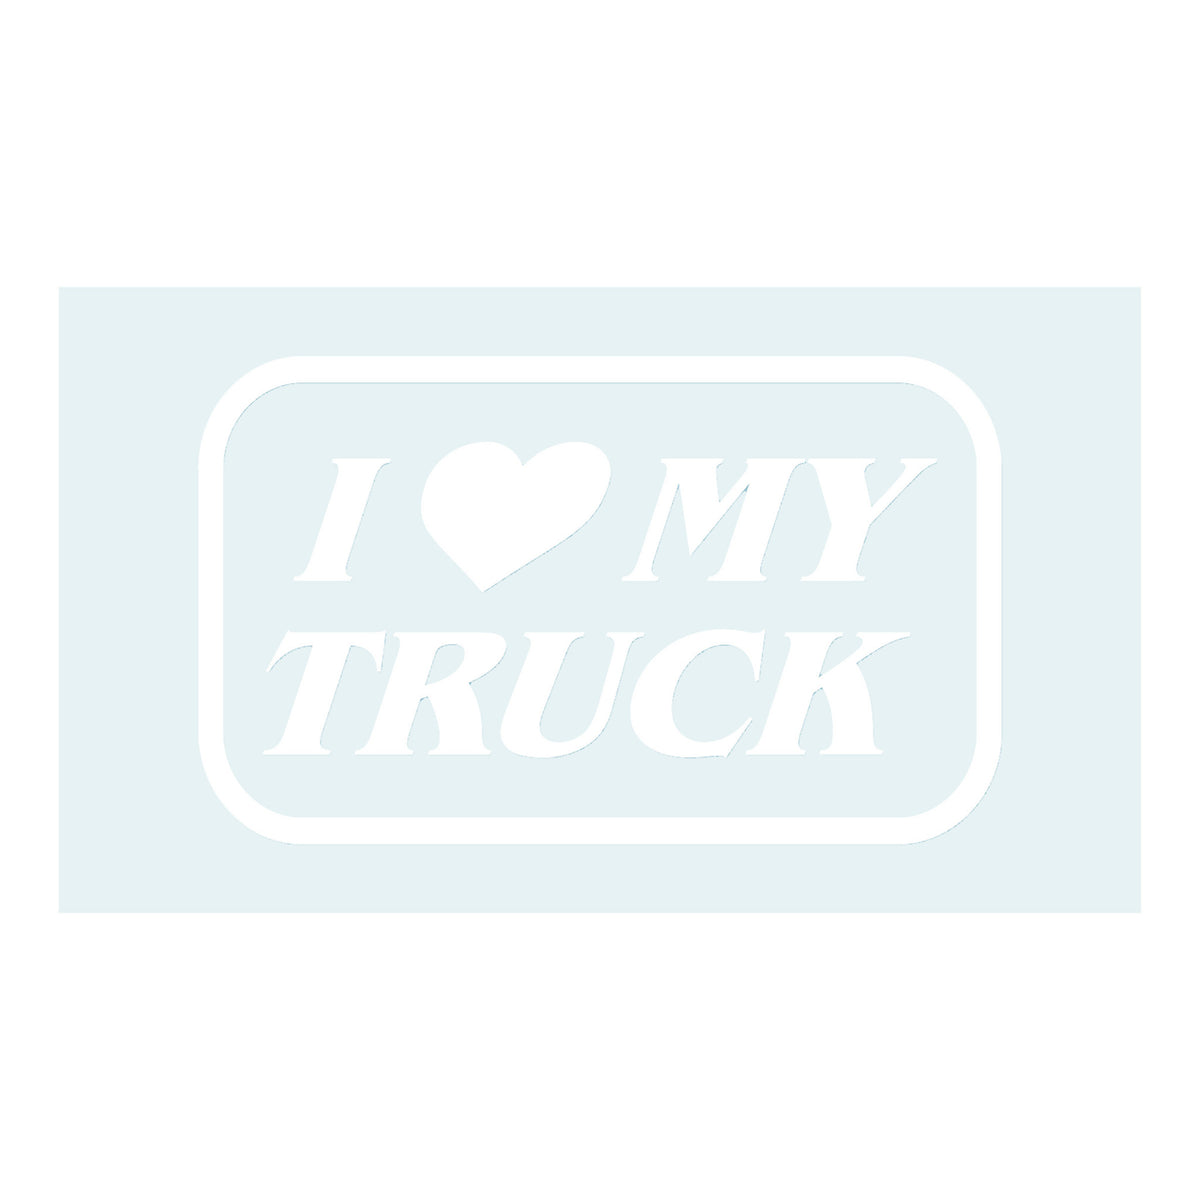 Man I Love Fishing Die Cut Vinyl Decal for Car, Truck, Laptop, Window's  CLICK to EXPLORE More Colors and Size Options and Free Shipping -   Canada